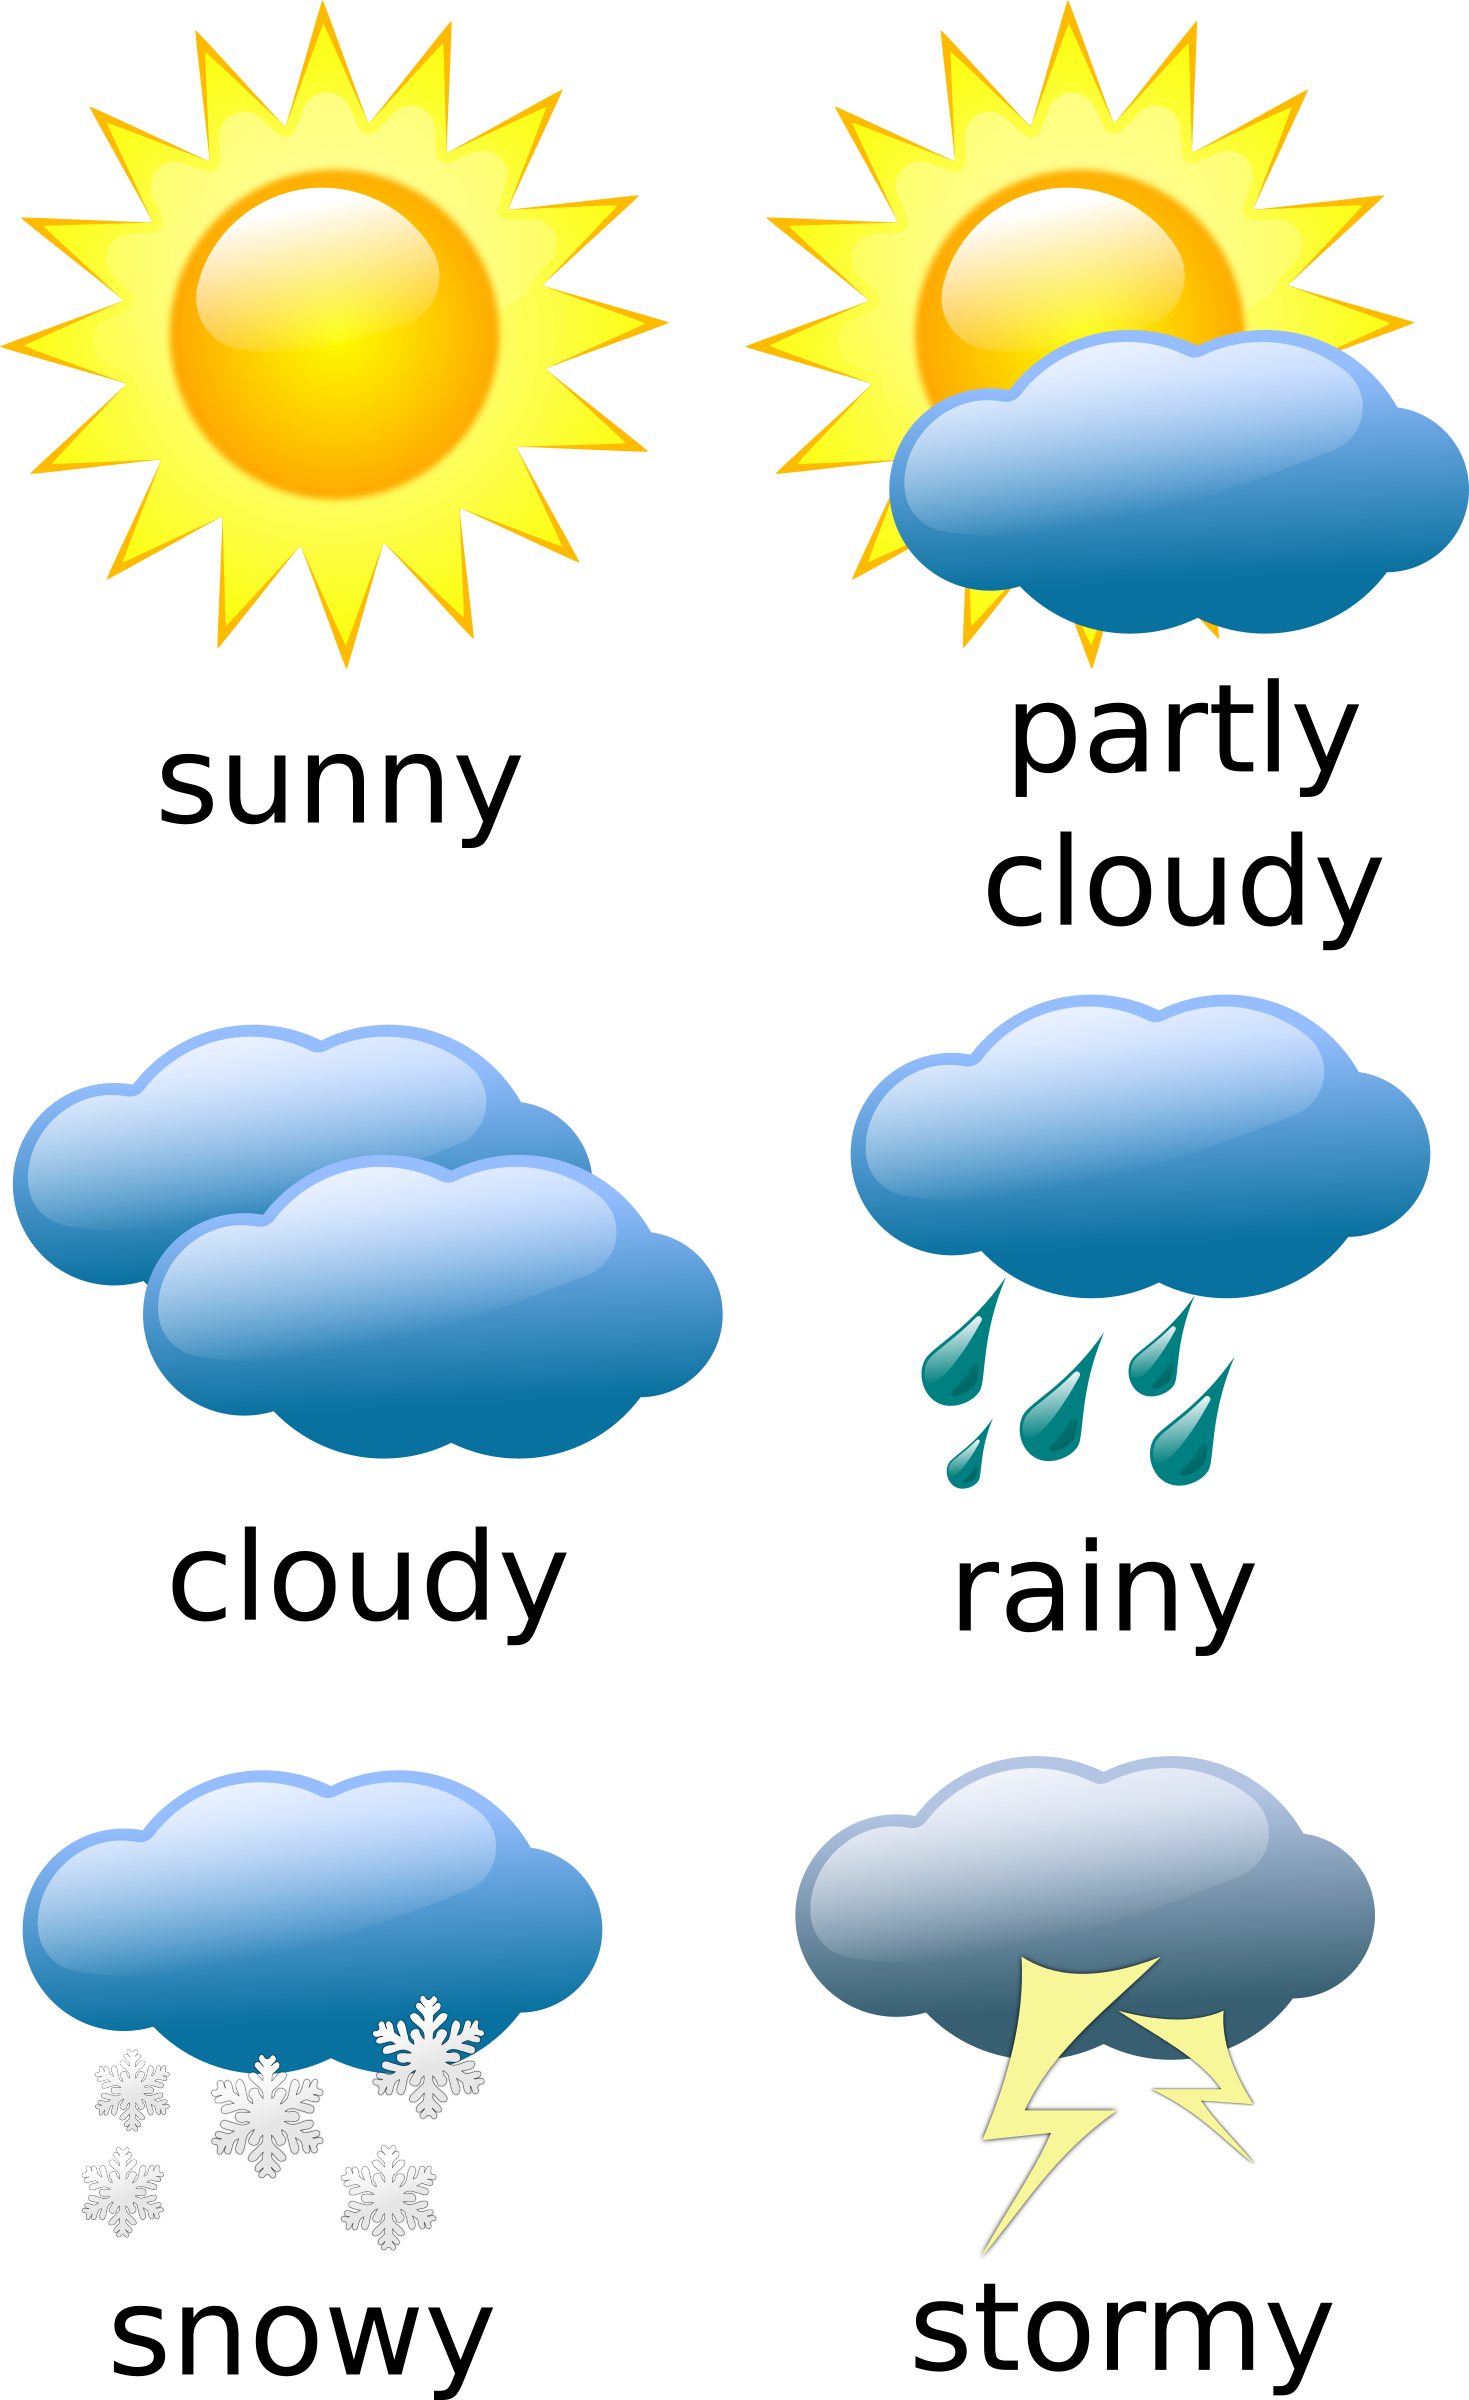 Cloudy clipart weather chart, Cloudy weather chart Transparent FREE for download on ...